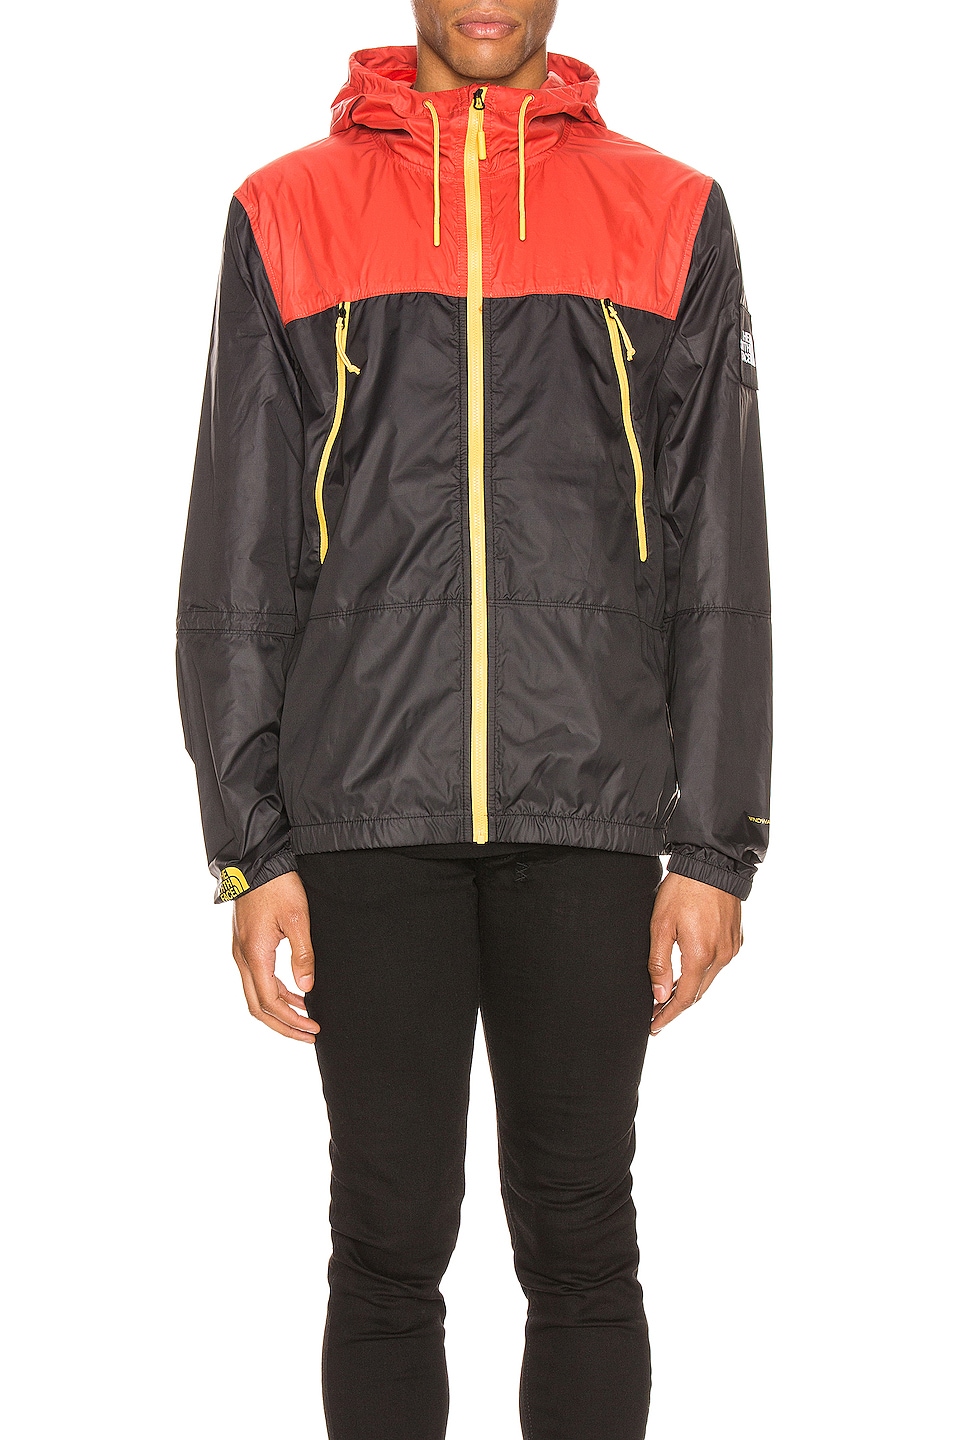 Image 1 of The North Face Black Box M 1990 Seasonal Mountain Jacket in TNF Black & Sunbaked Red